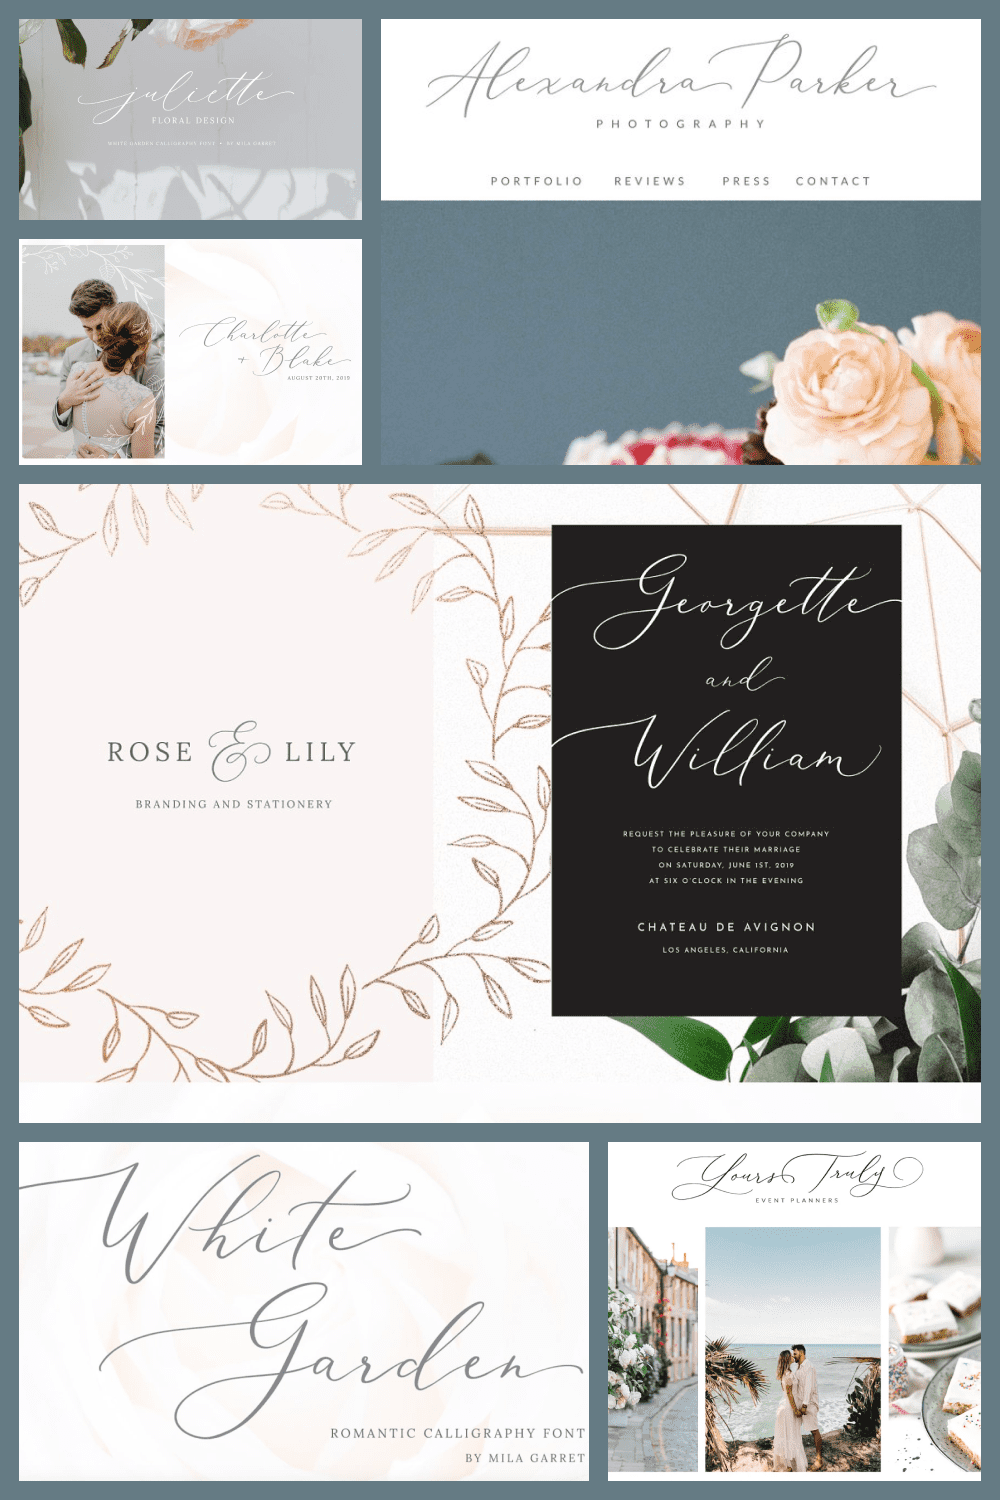 Stylish invitations in pastel colors. They are suitable for both classic and themed weddings.